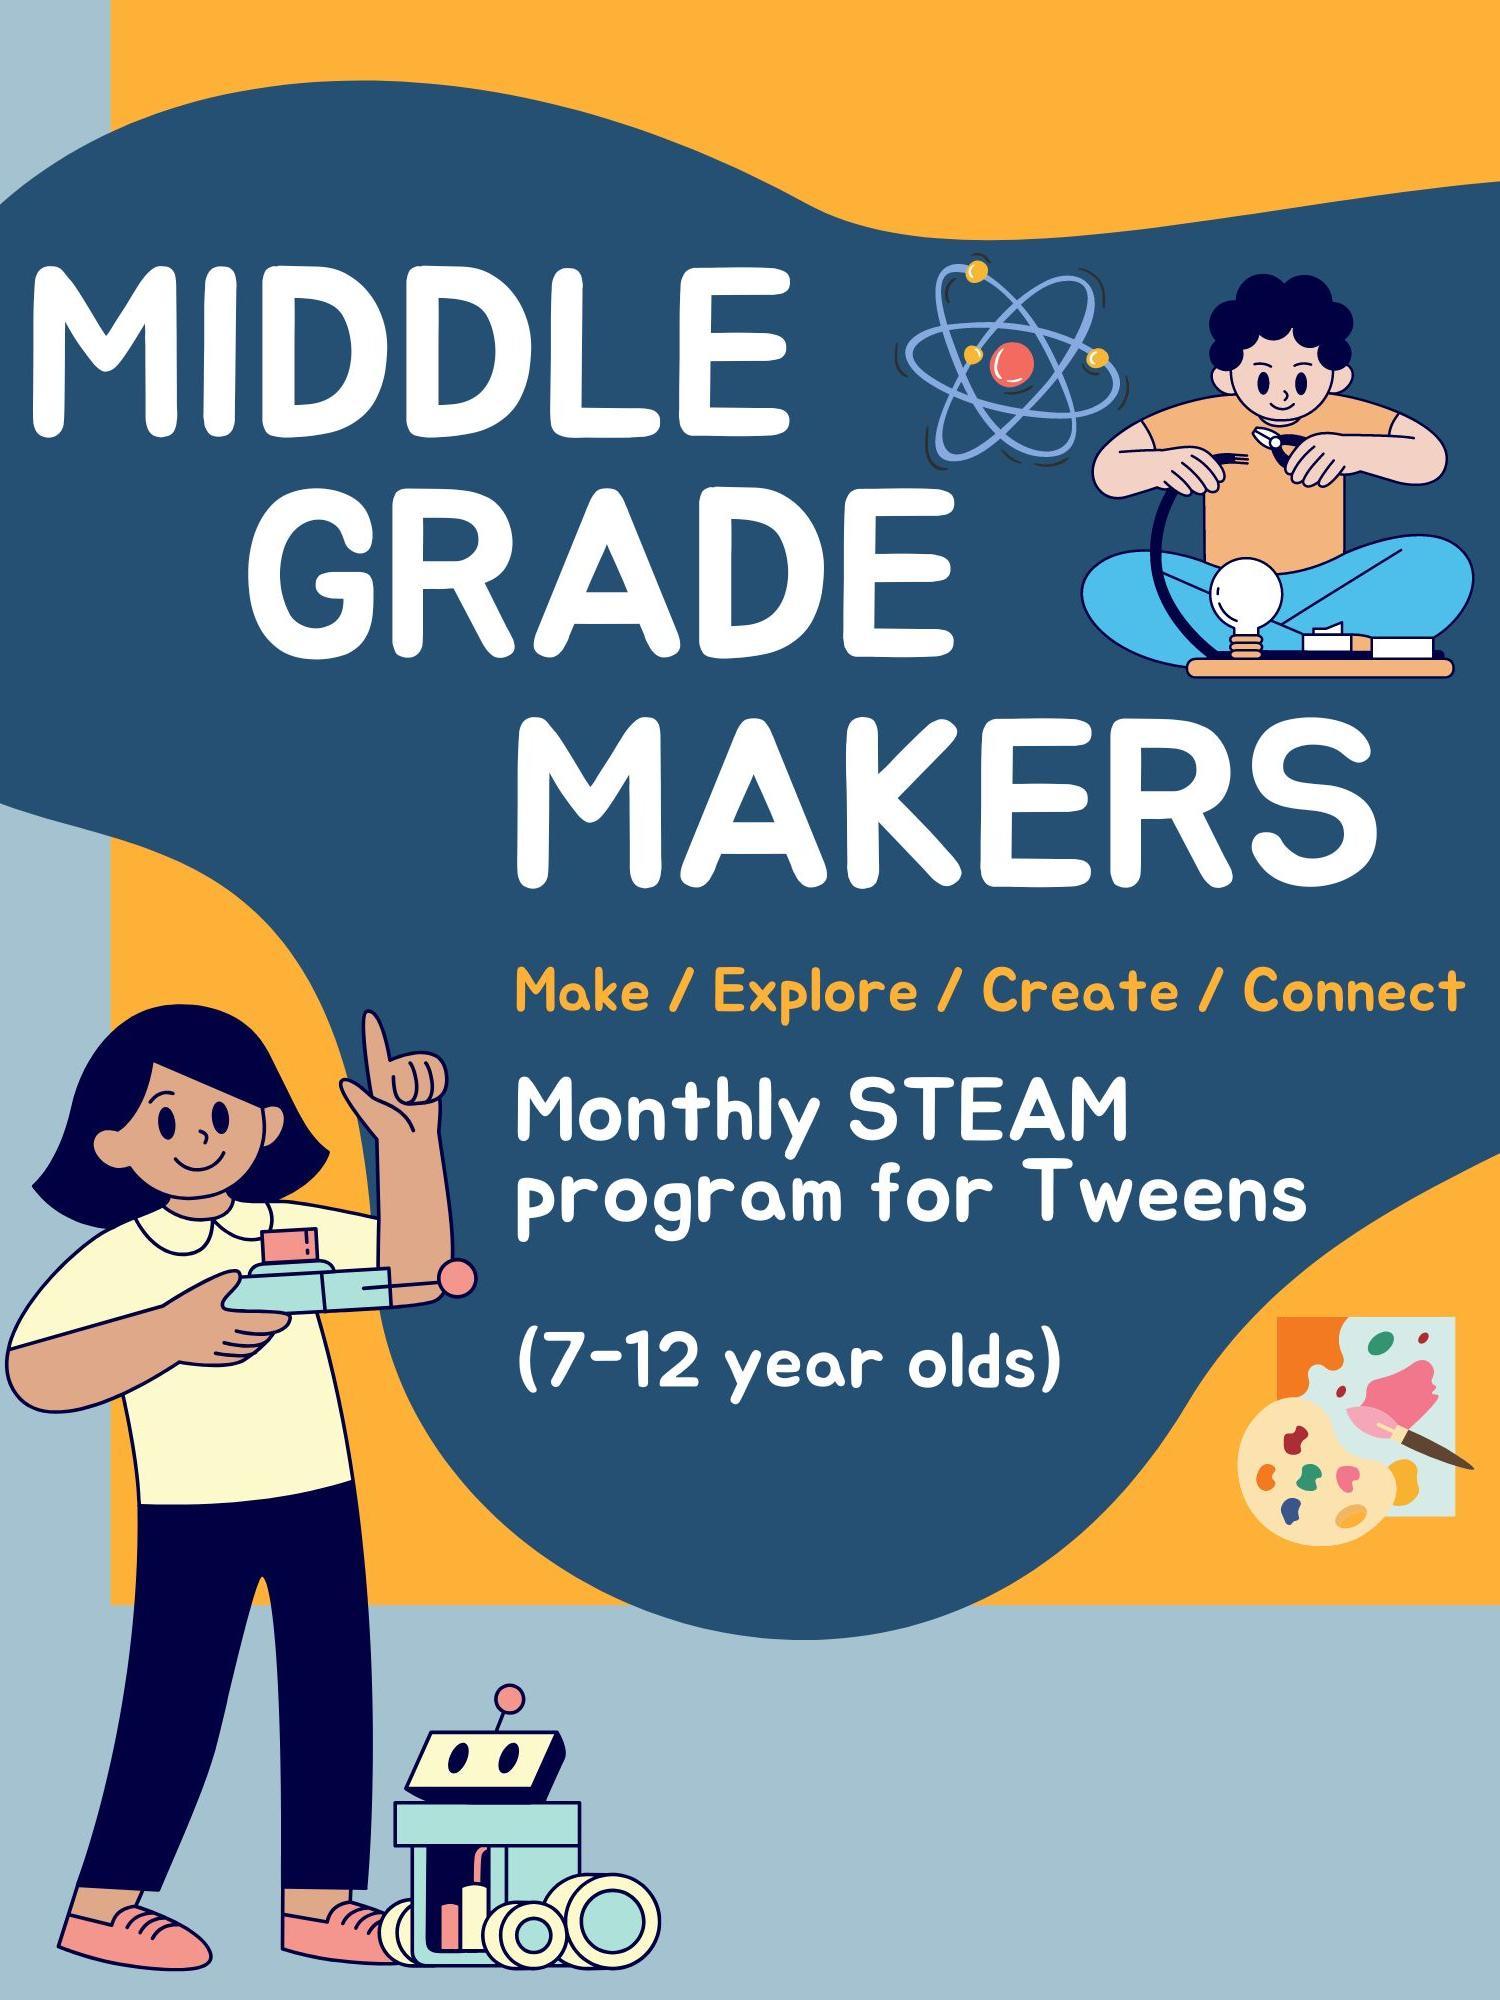 Young person with a robot and a young person with a STEM based electronic project promoting Middle Grade Makers program.